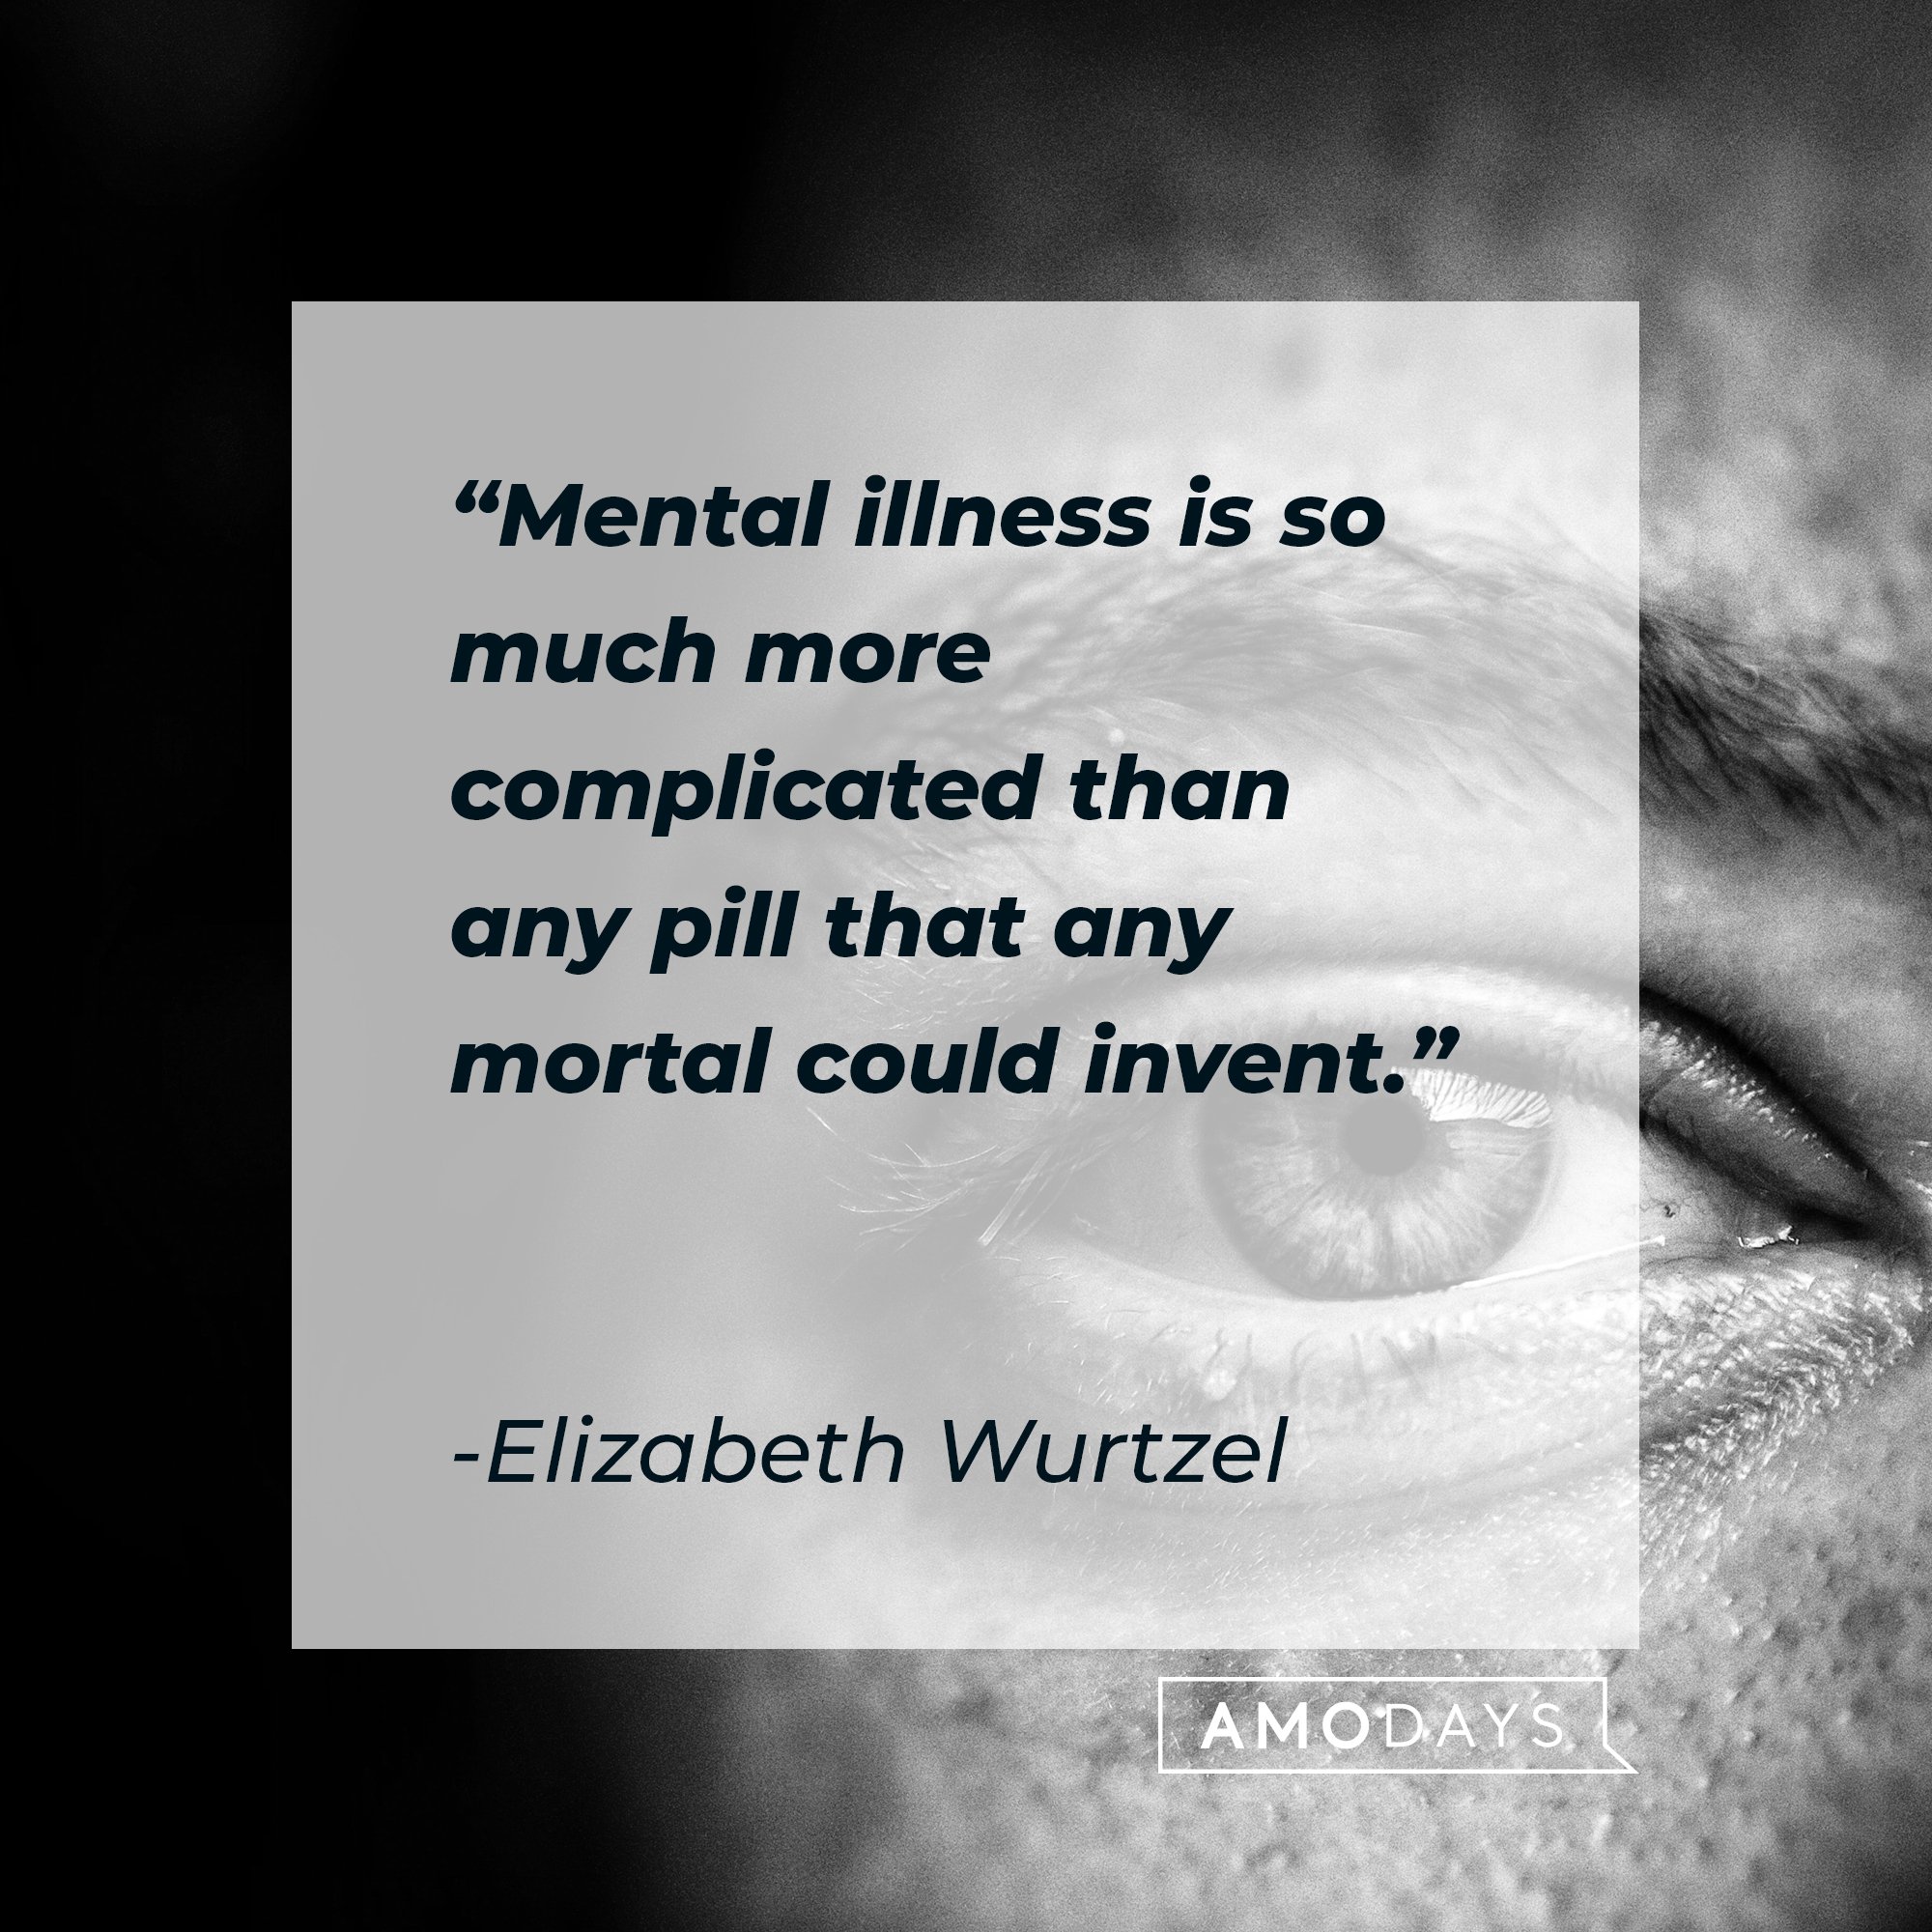 Elizabeth Wurtzel's quote: "Mental illness is so much more complicated than any pill that any mortal could invent." | Image: AmoDays